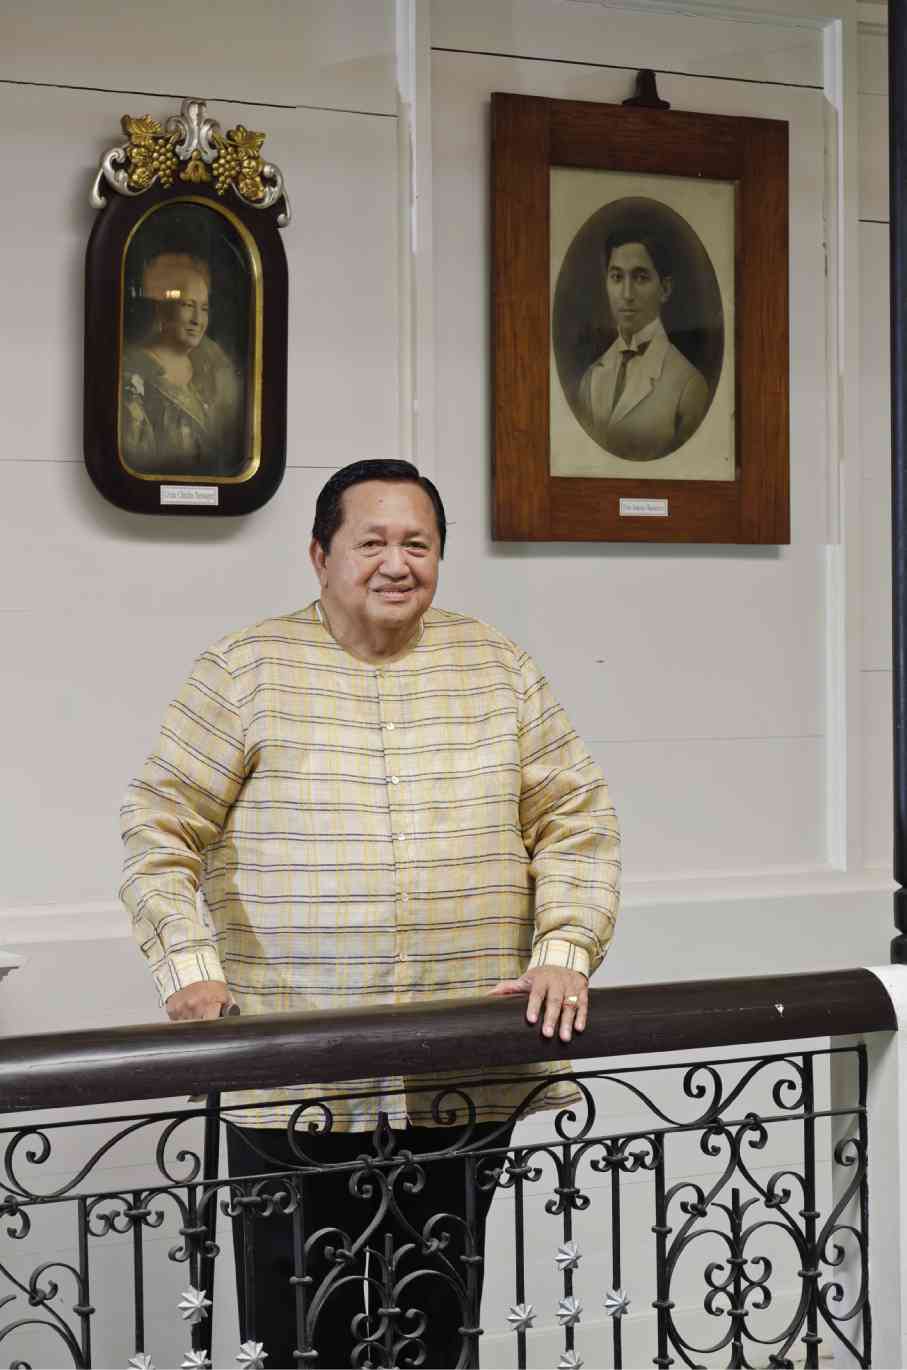 ADOESCUDERO, in Patis Tesoro barong, stands before the portraits of his ancestors.